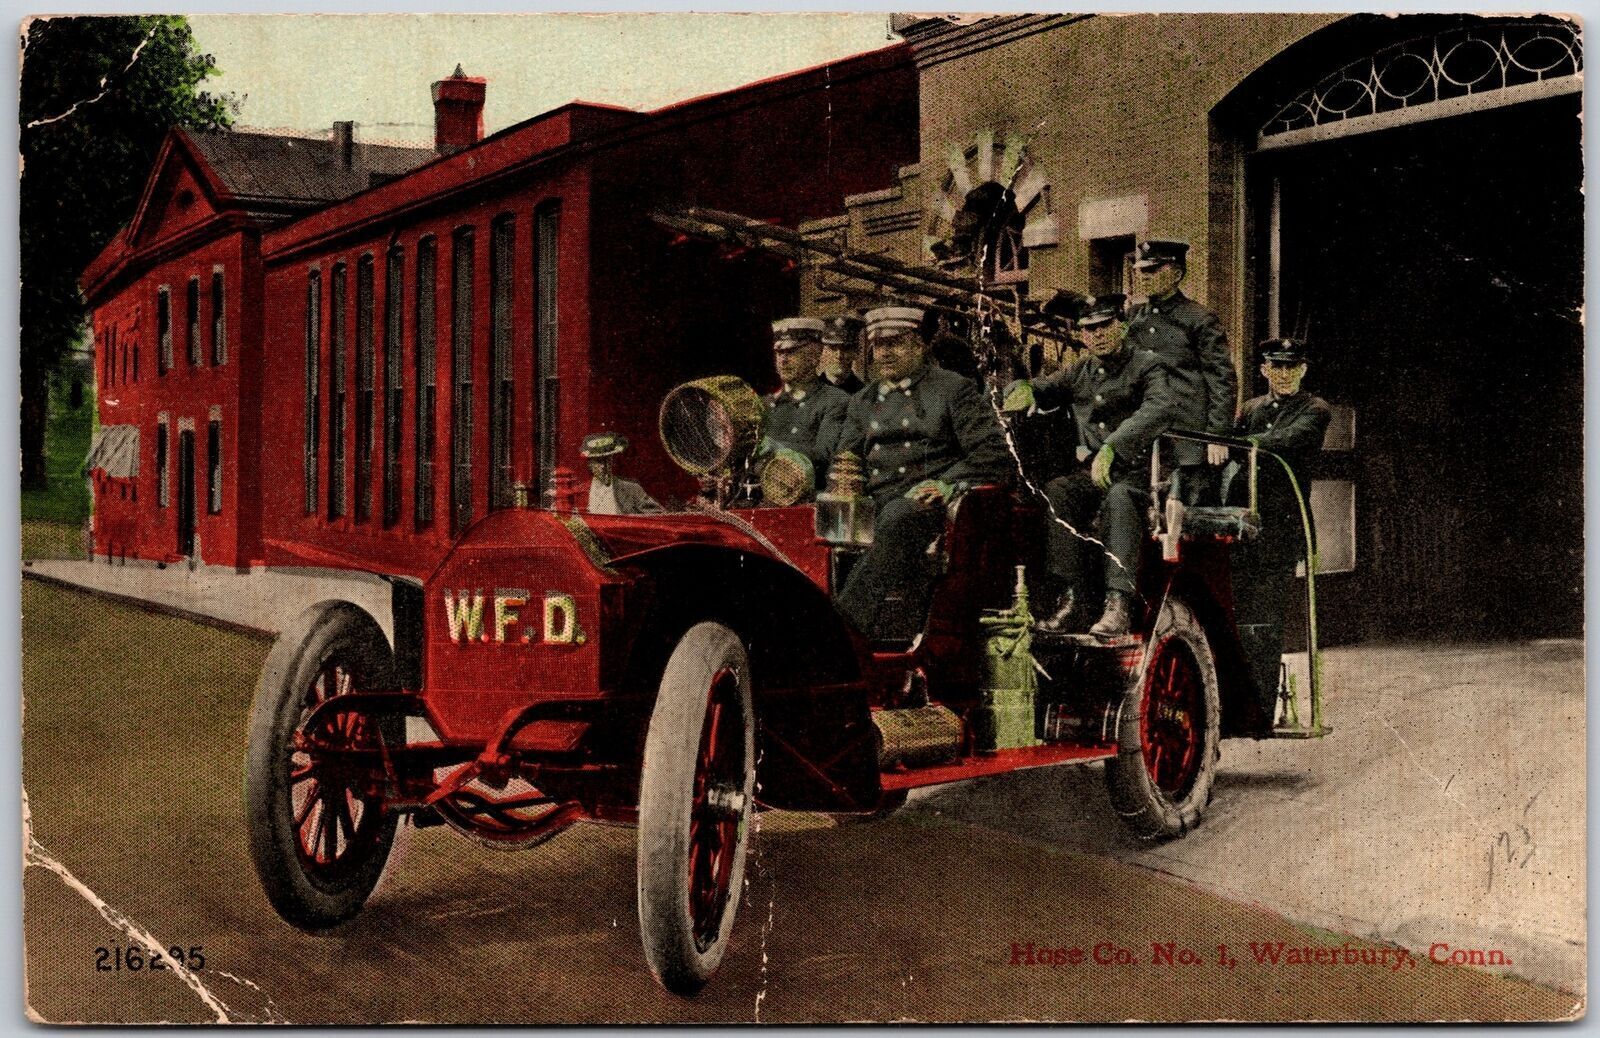 1912 Hase Company No. 1 Waterbury Connecticut Fire Department Posted Postcard